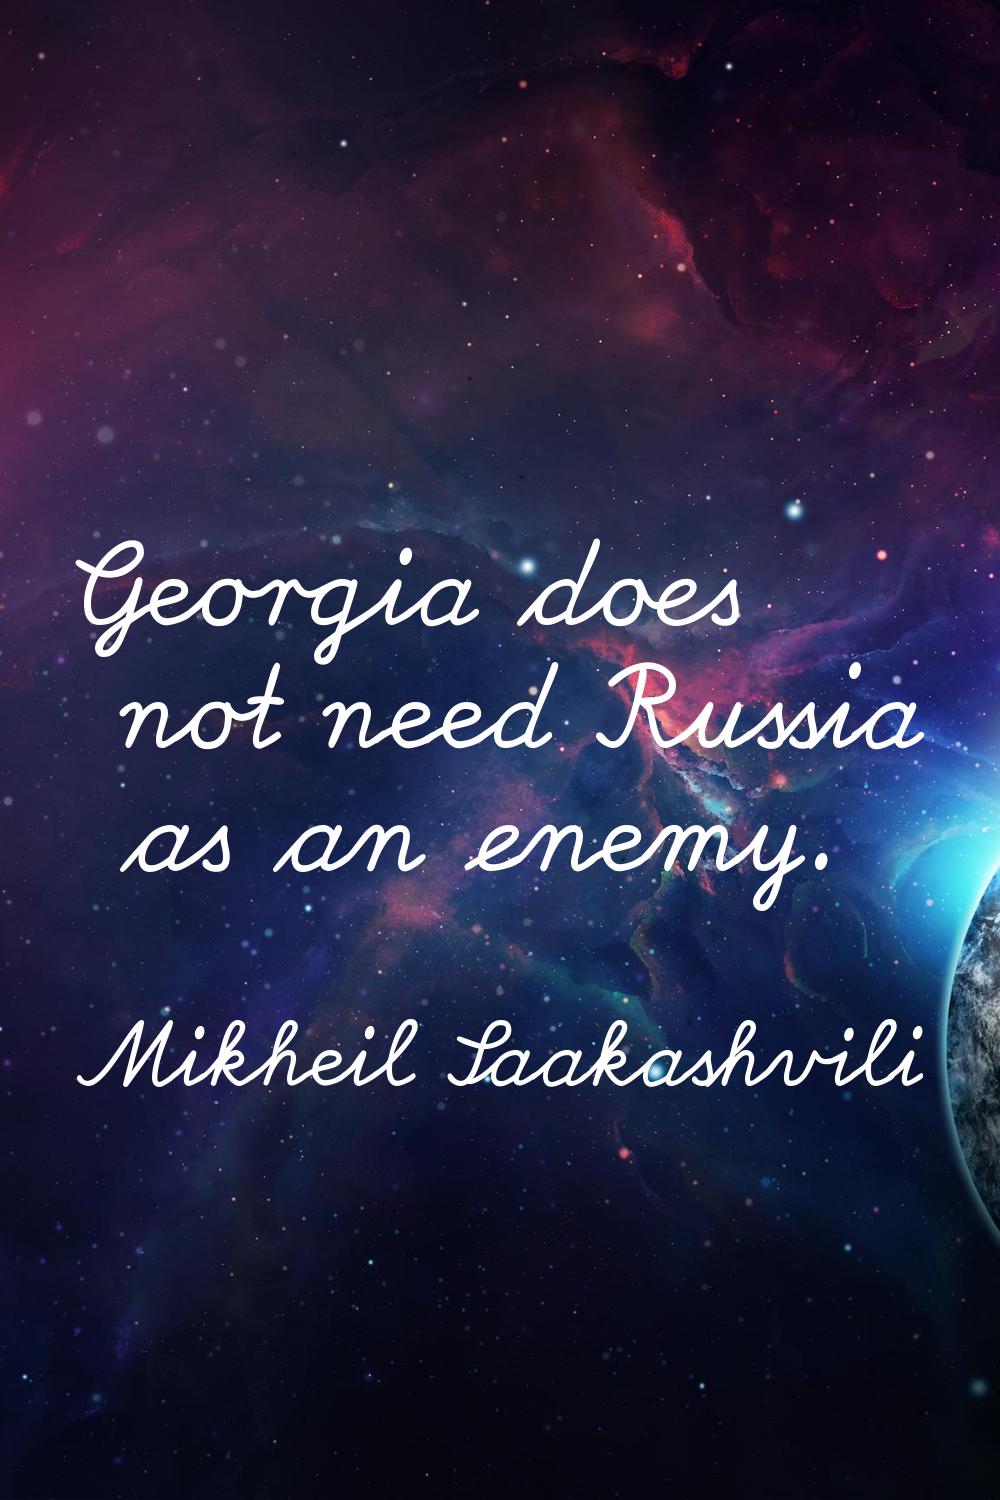 Georgia does not need Russia as an enemy.